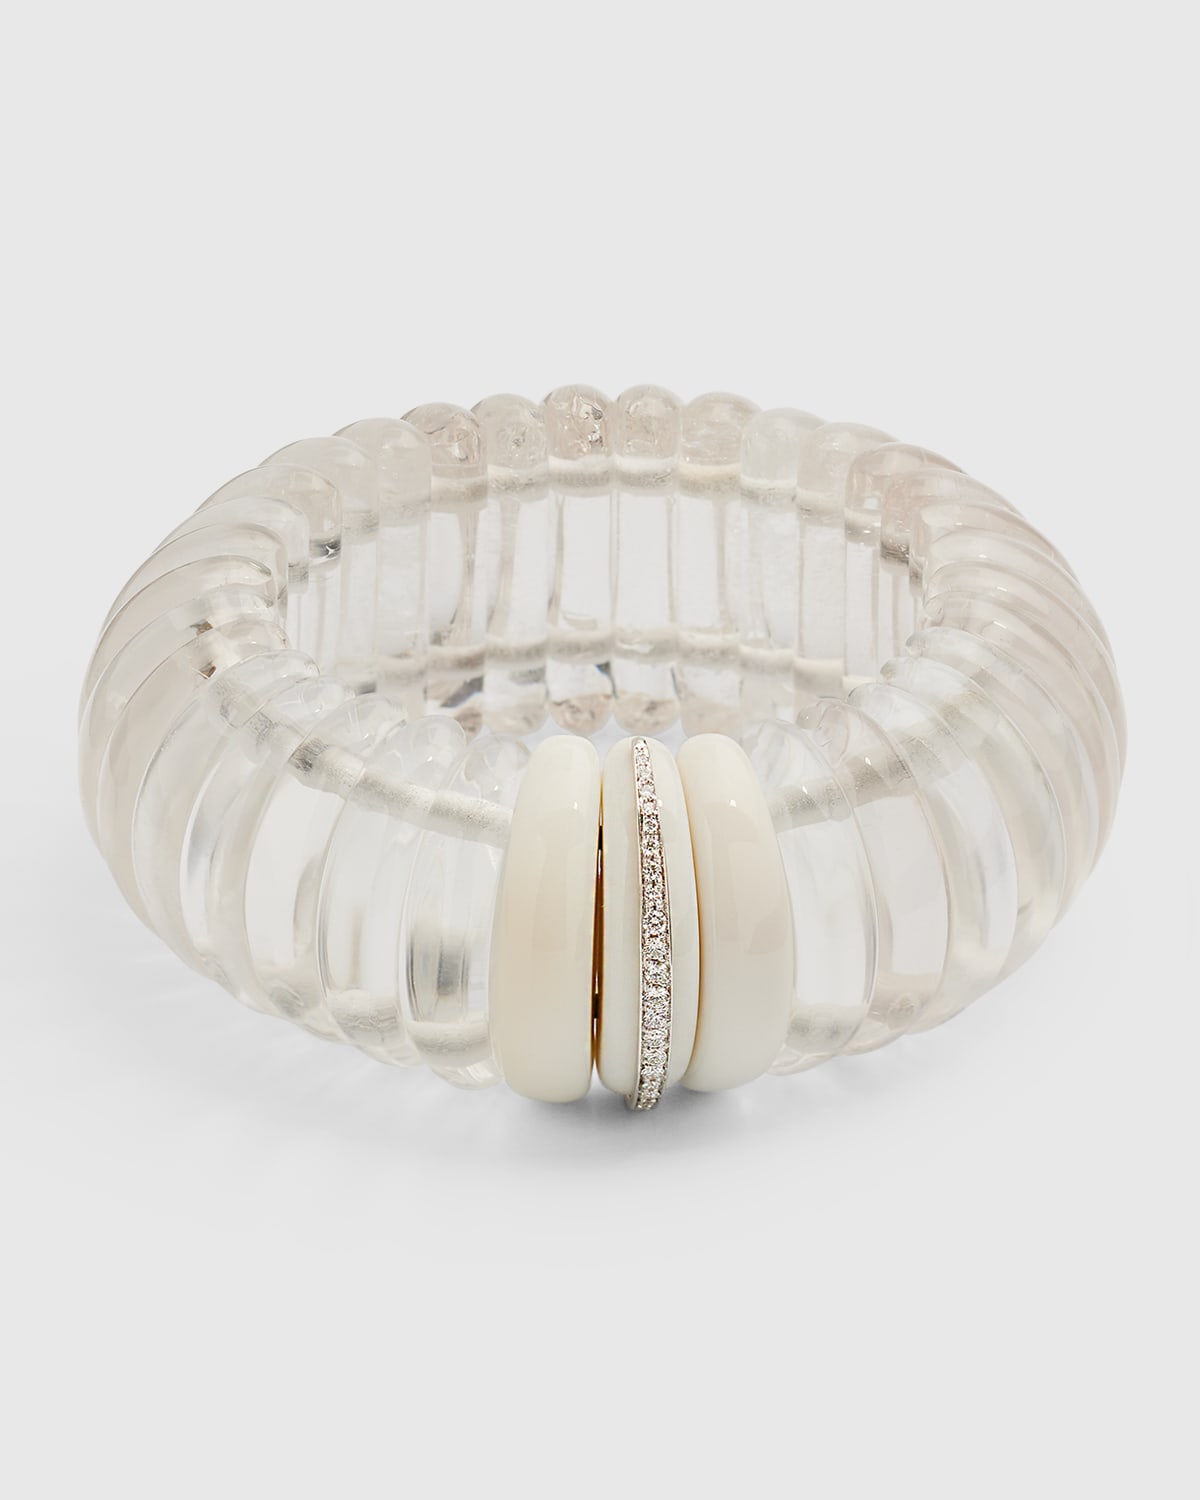 Sanalitro 18k White Gold Expandable Spicchio Bracelet With Rock Crystals, White Agate And Diamonds